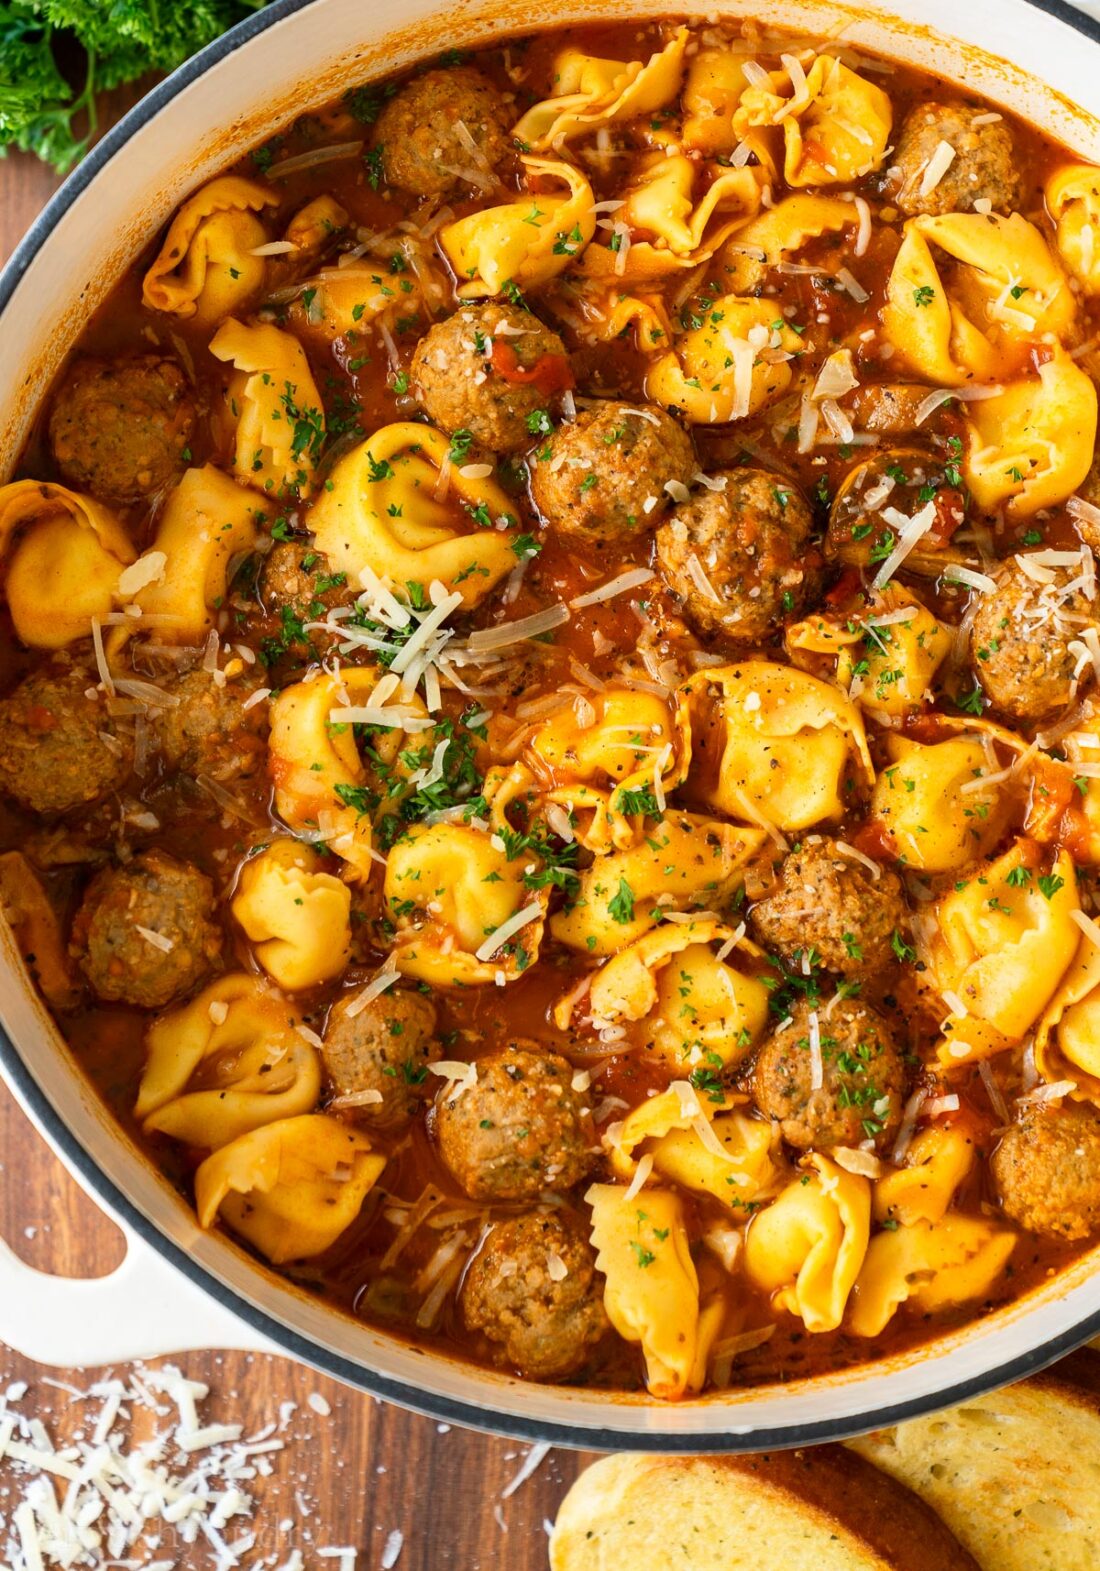 Pot of cooked tortellini meatballs soup.